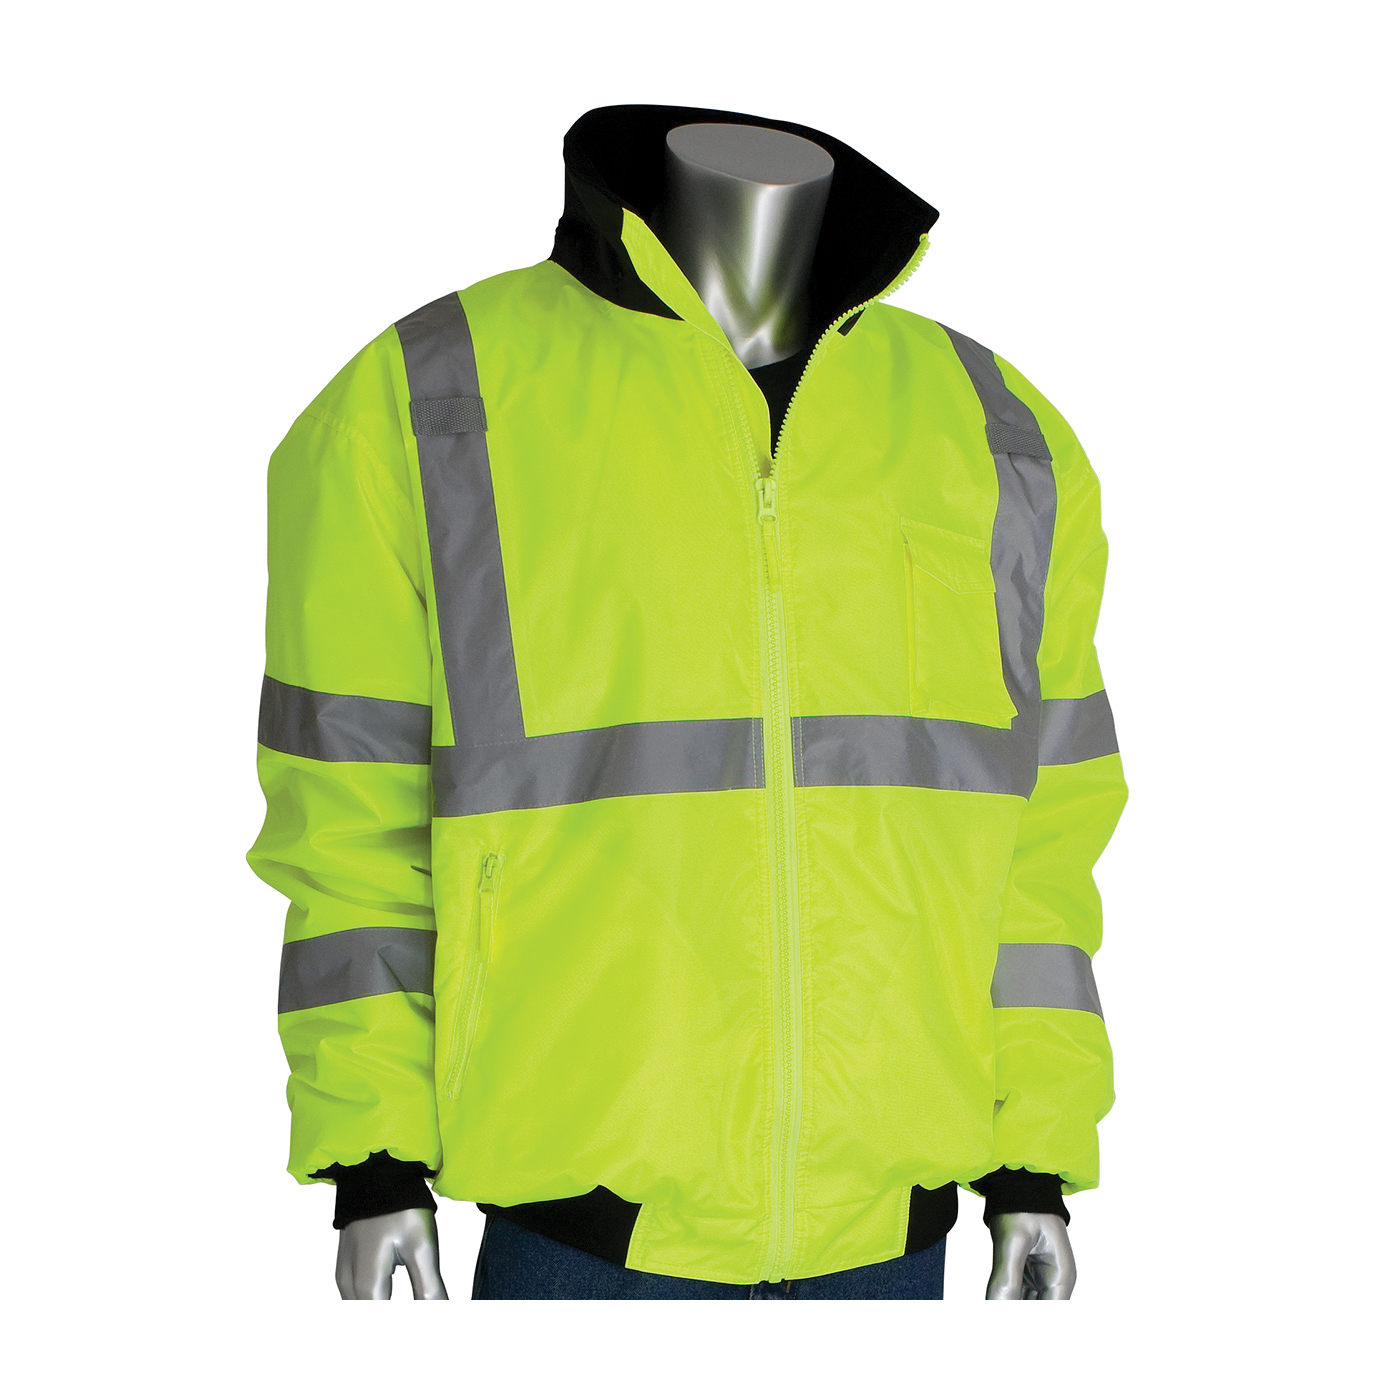 PIP® 333-1762-LY/S Bomber Jacket With Zip-Out Fleece Liner, Hi-Viz Lime Yellow, Polyester, 52 in Chest, Resists: Water, ANSI Type R Class 3